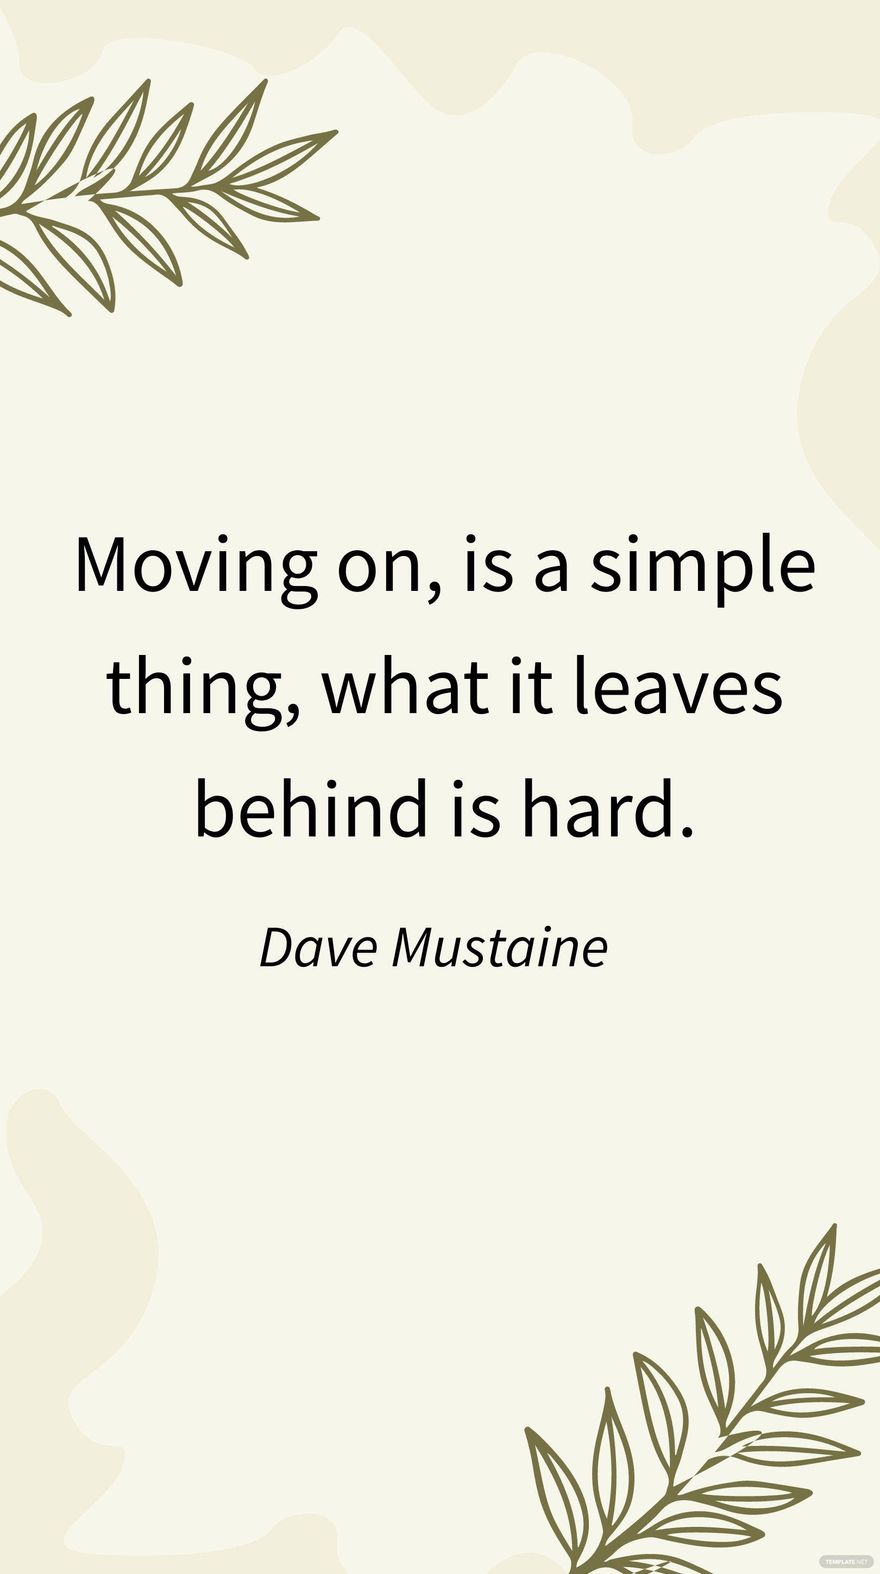 Dave Mustaine - Moving on, is a simple thing, what it leaves behind is hard. in JPG